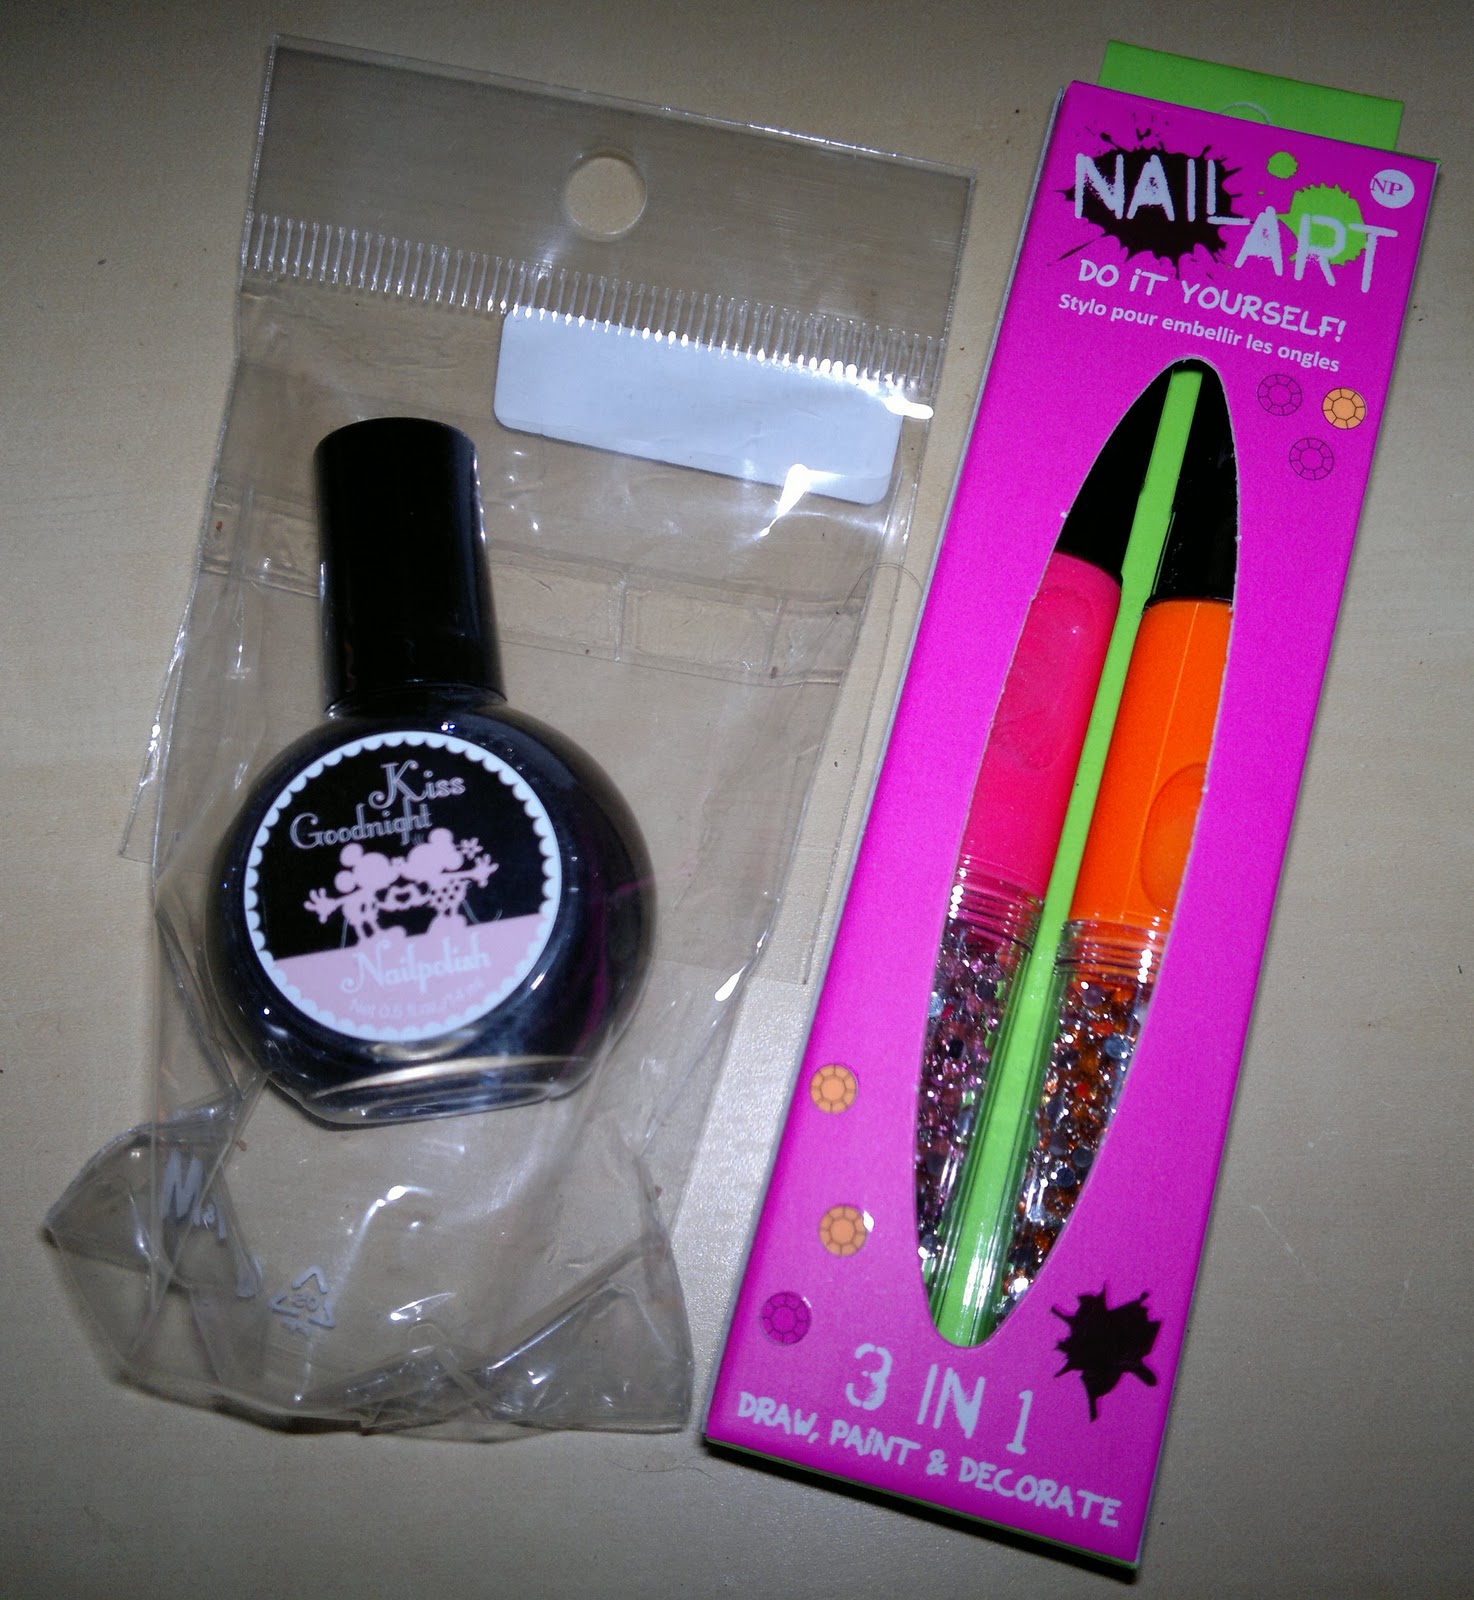 They invited me to try their 3 in 1 Neon Nail Art pens, which are available